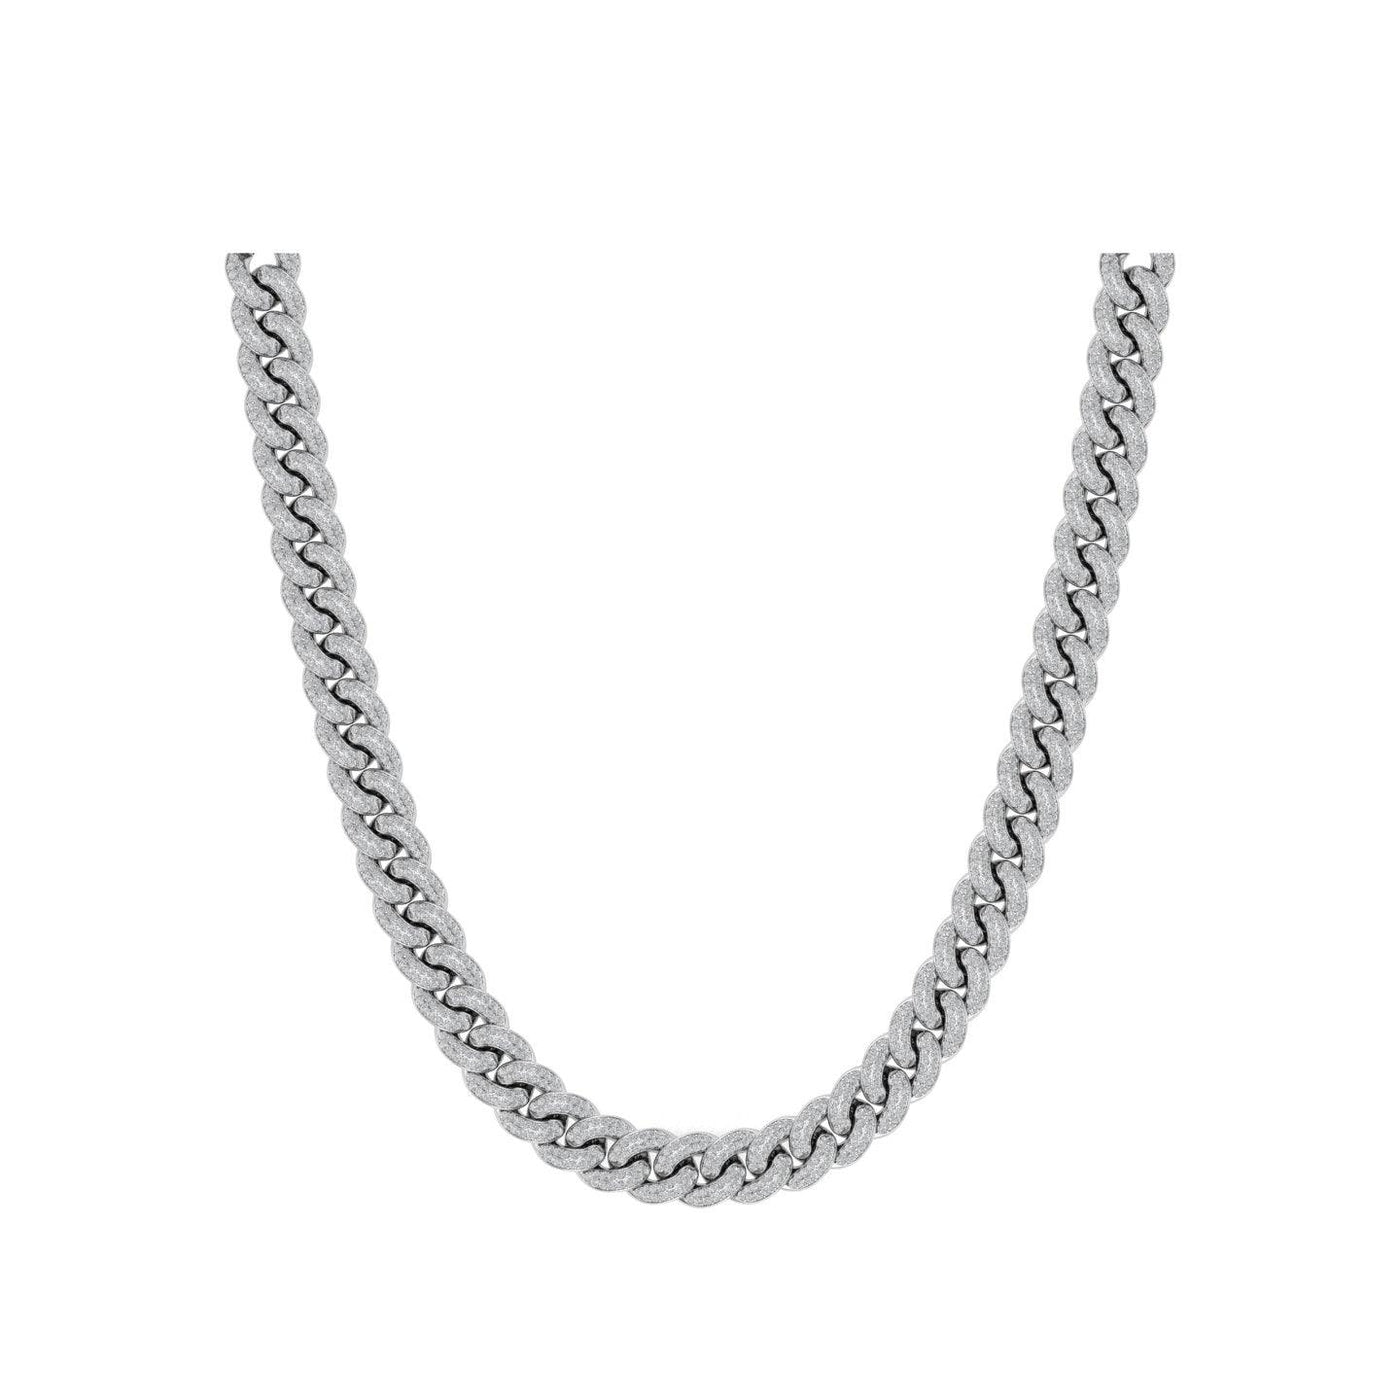 White Gold Color 9mm Cuban Chain Made of 925 Sterling Silver Material